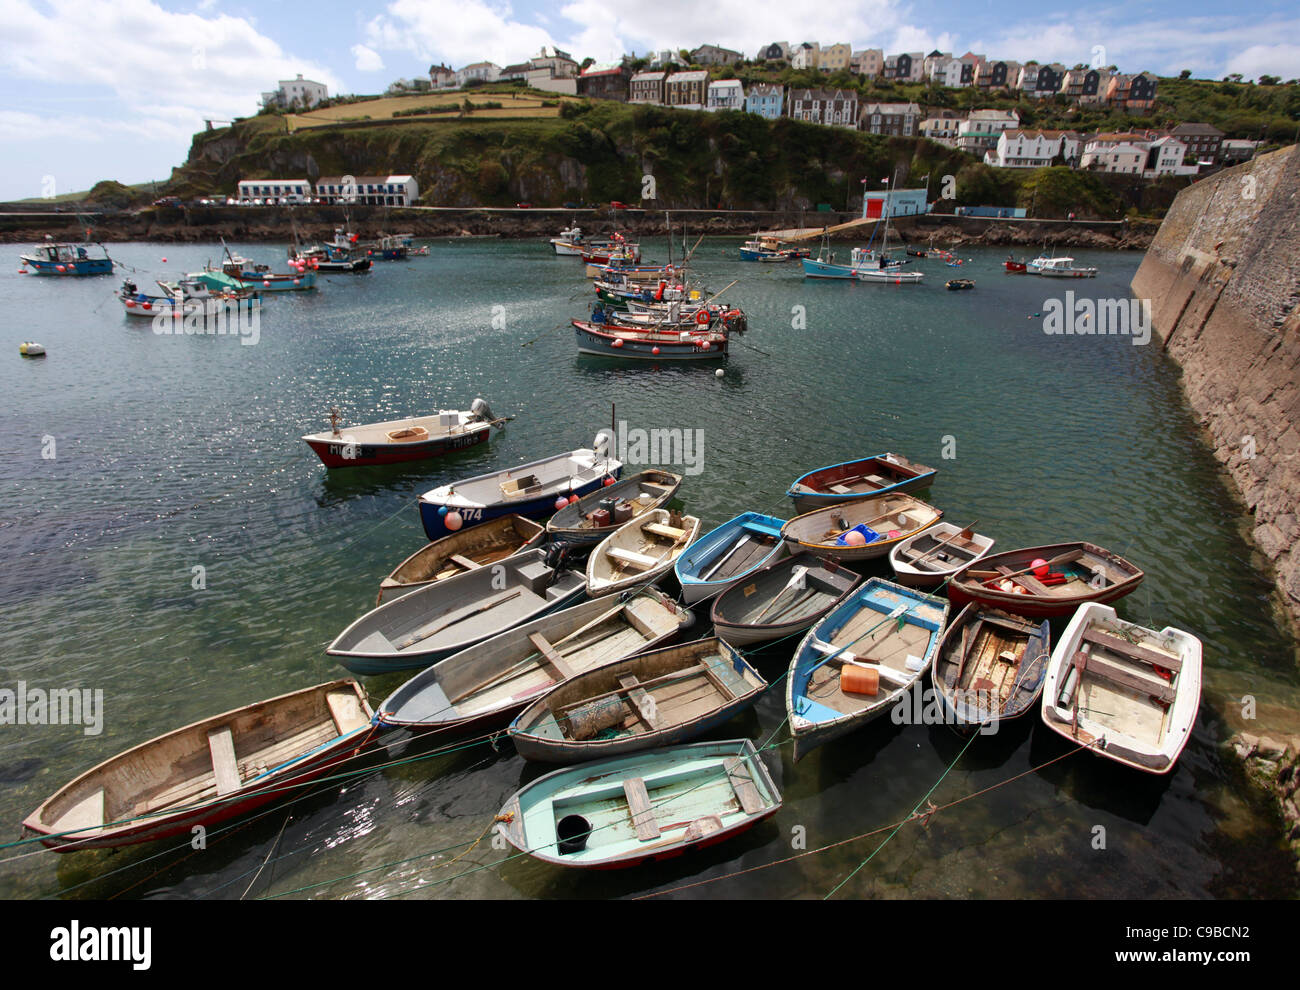 Fishing boats pictured moored in St Austell harbour in Cornwall, United Kingdom. Stock Photo